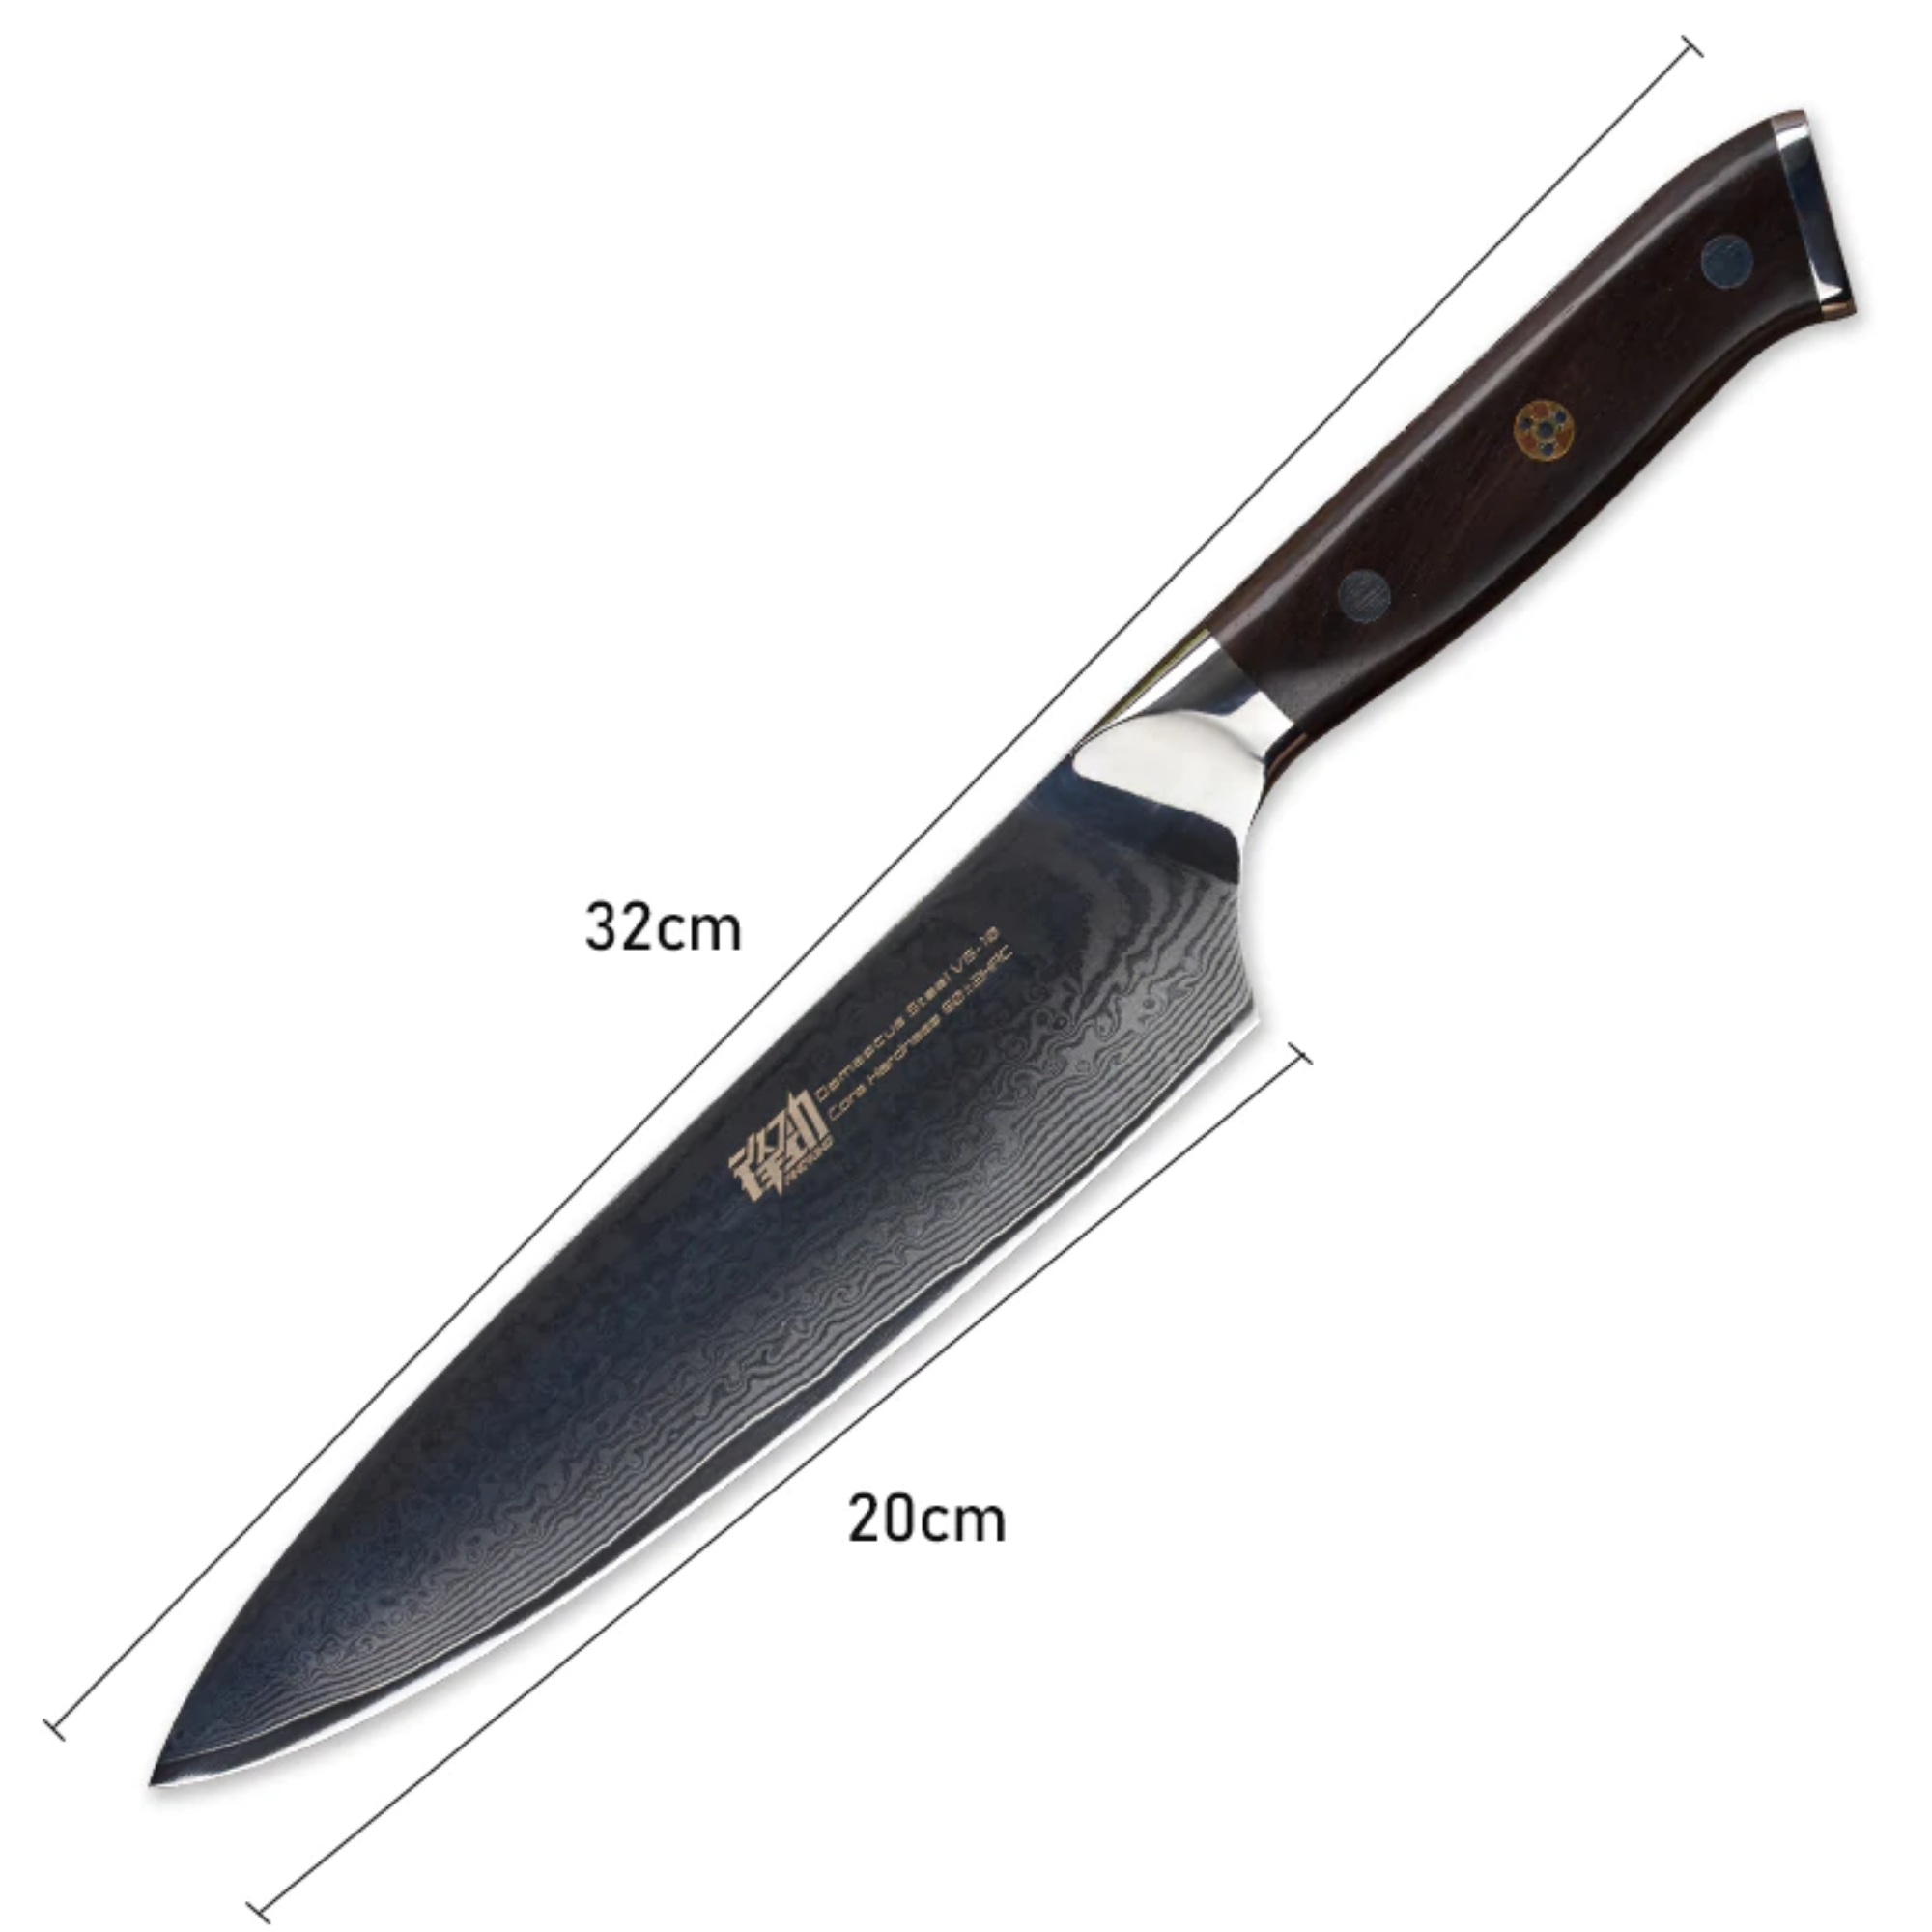 Contoured Damascus Chef Knife with an Ebony Wood Handle - 8 inch / 20cm